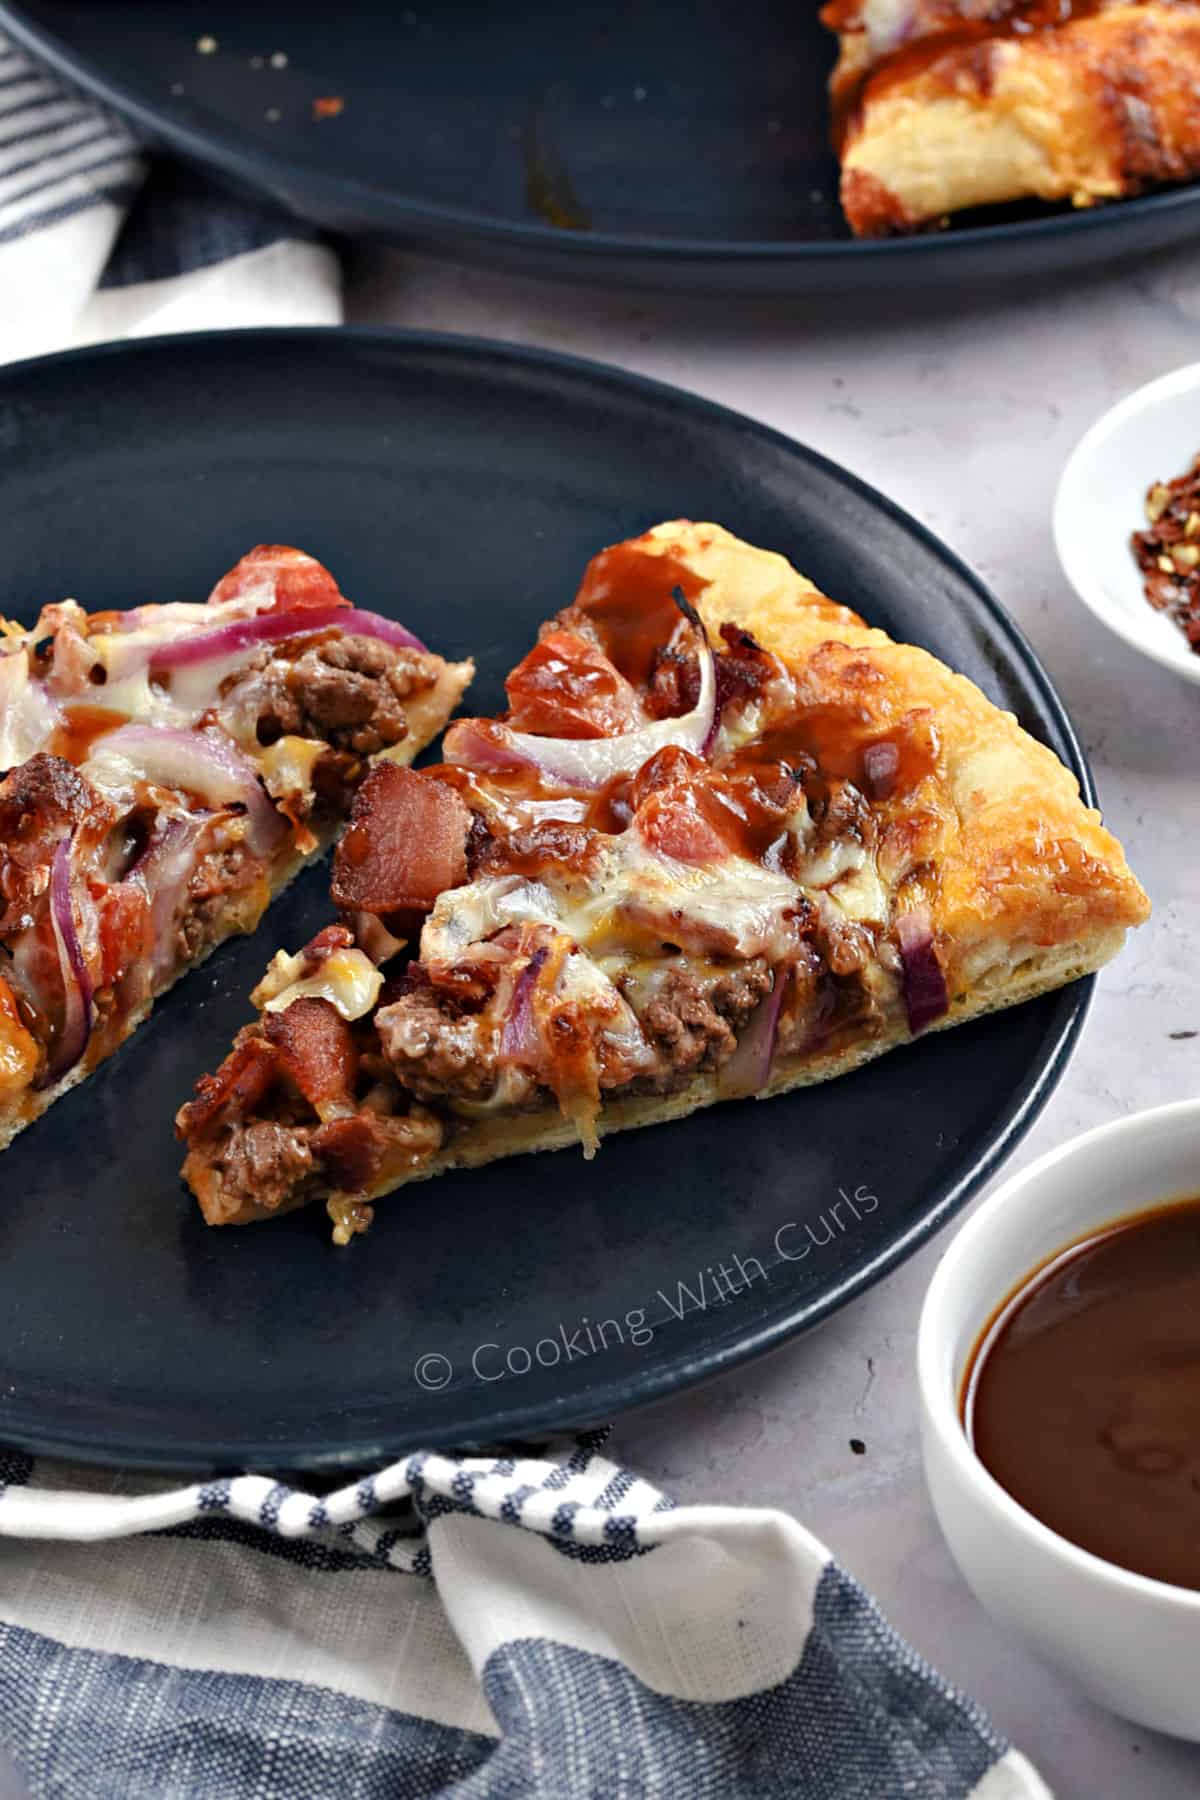 Two slices of bacon cheeseburger pizza on a blue plate with bowls of barbecue sauce and chili flakes on the side. 